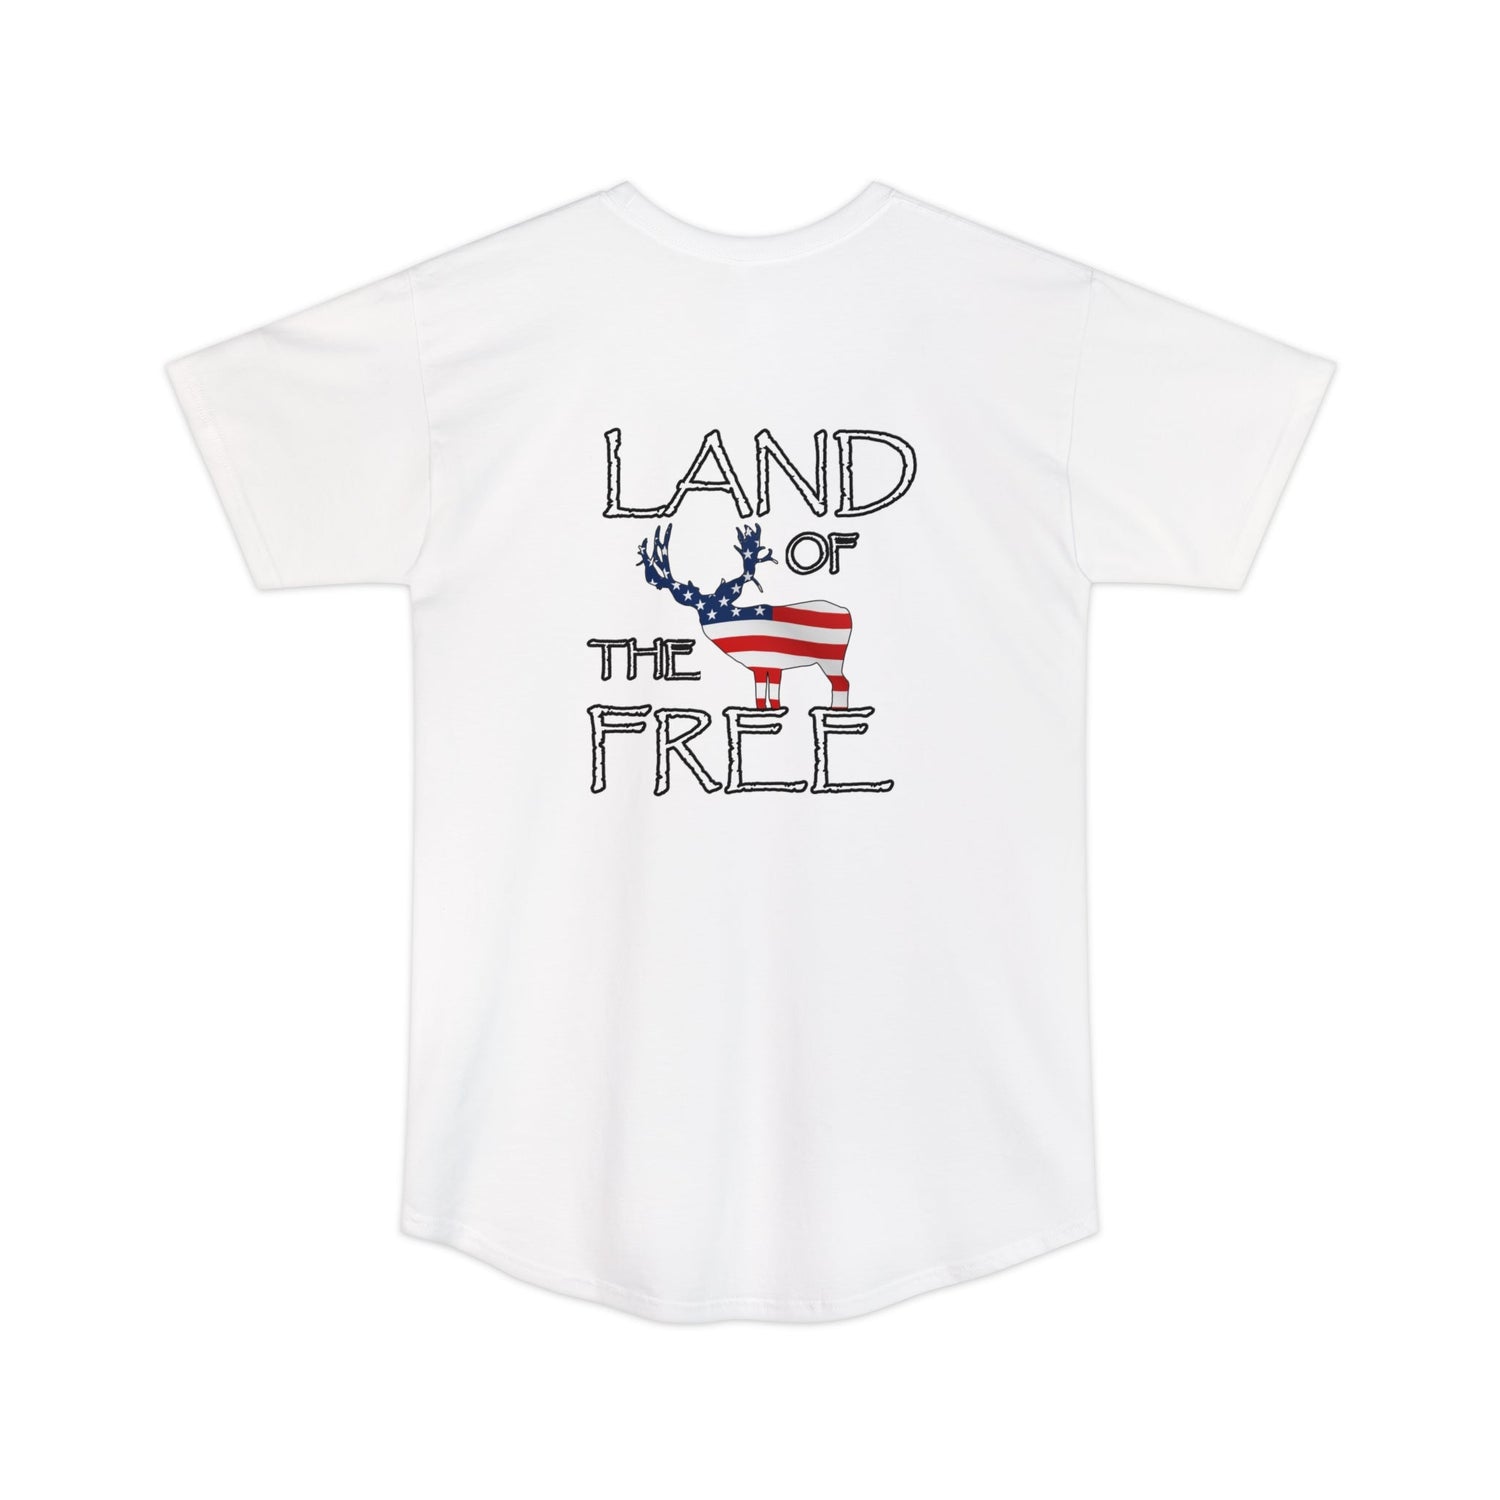 Athletic tall patriotic deer hunting t-shirt, color white, back design placement